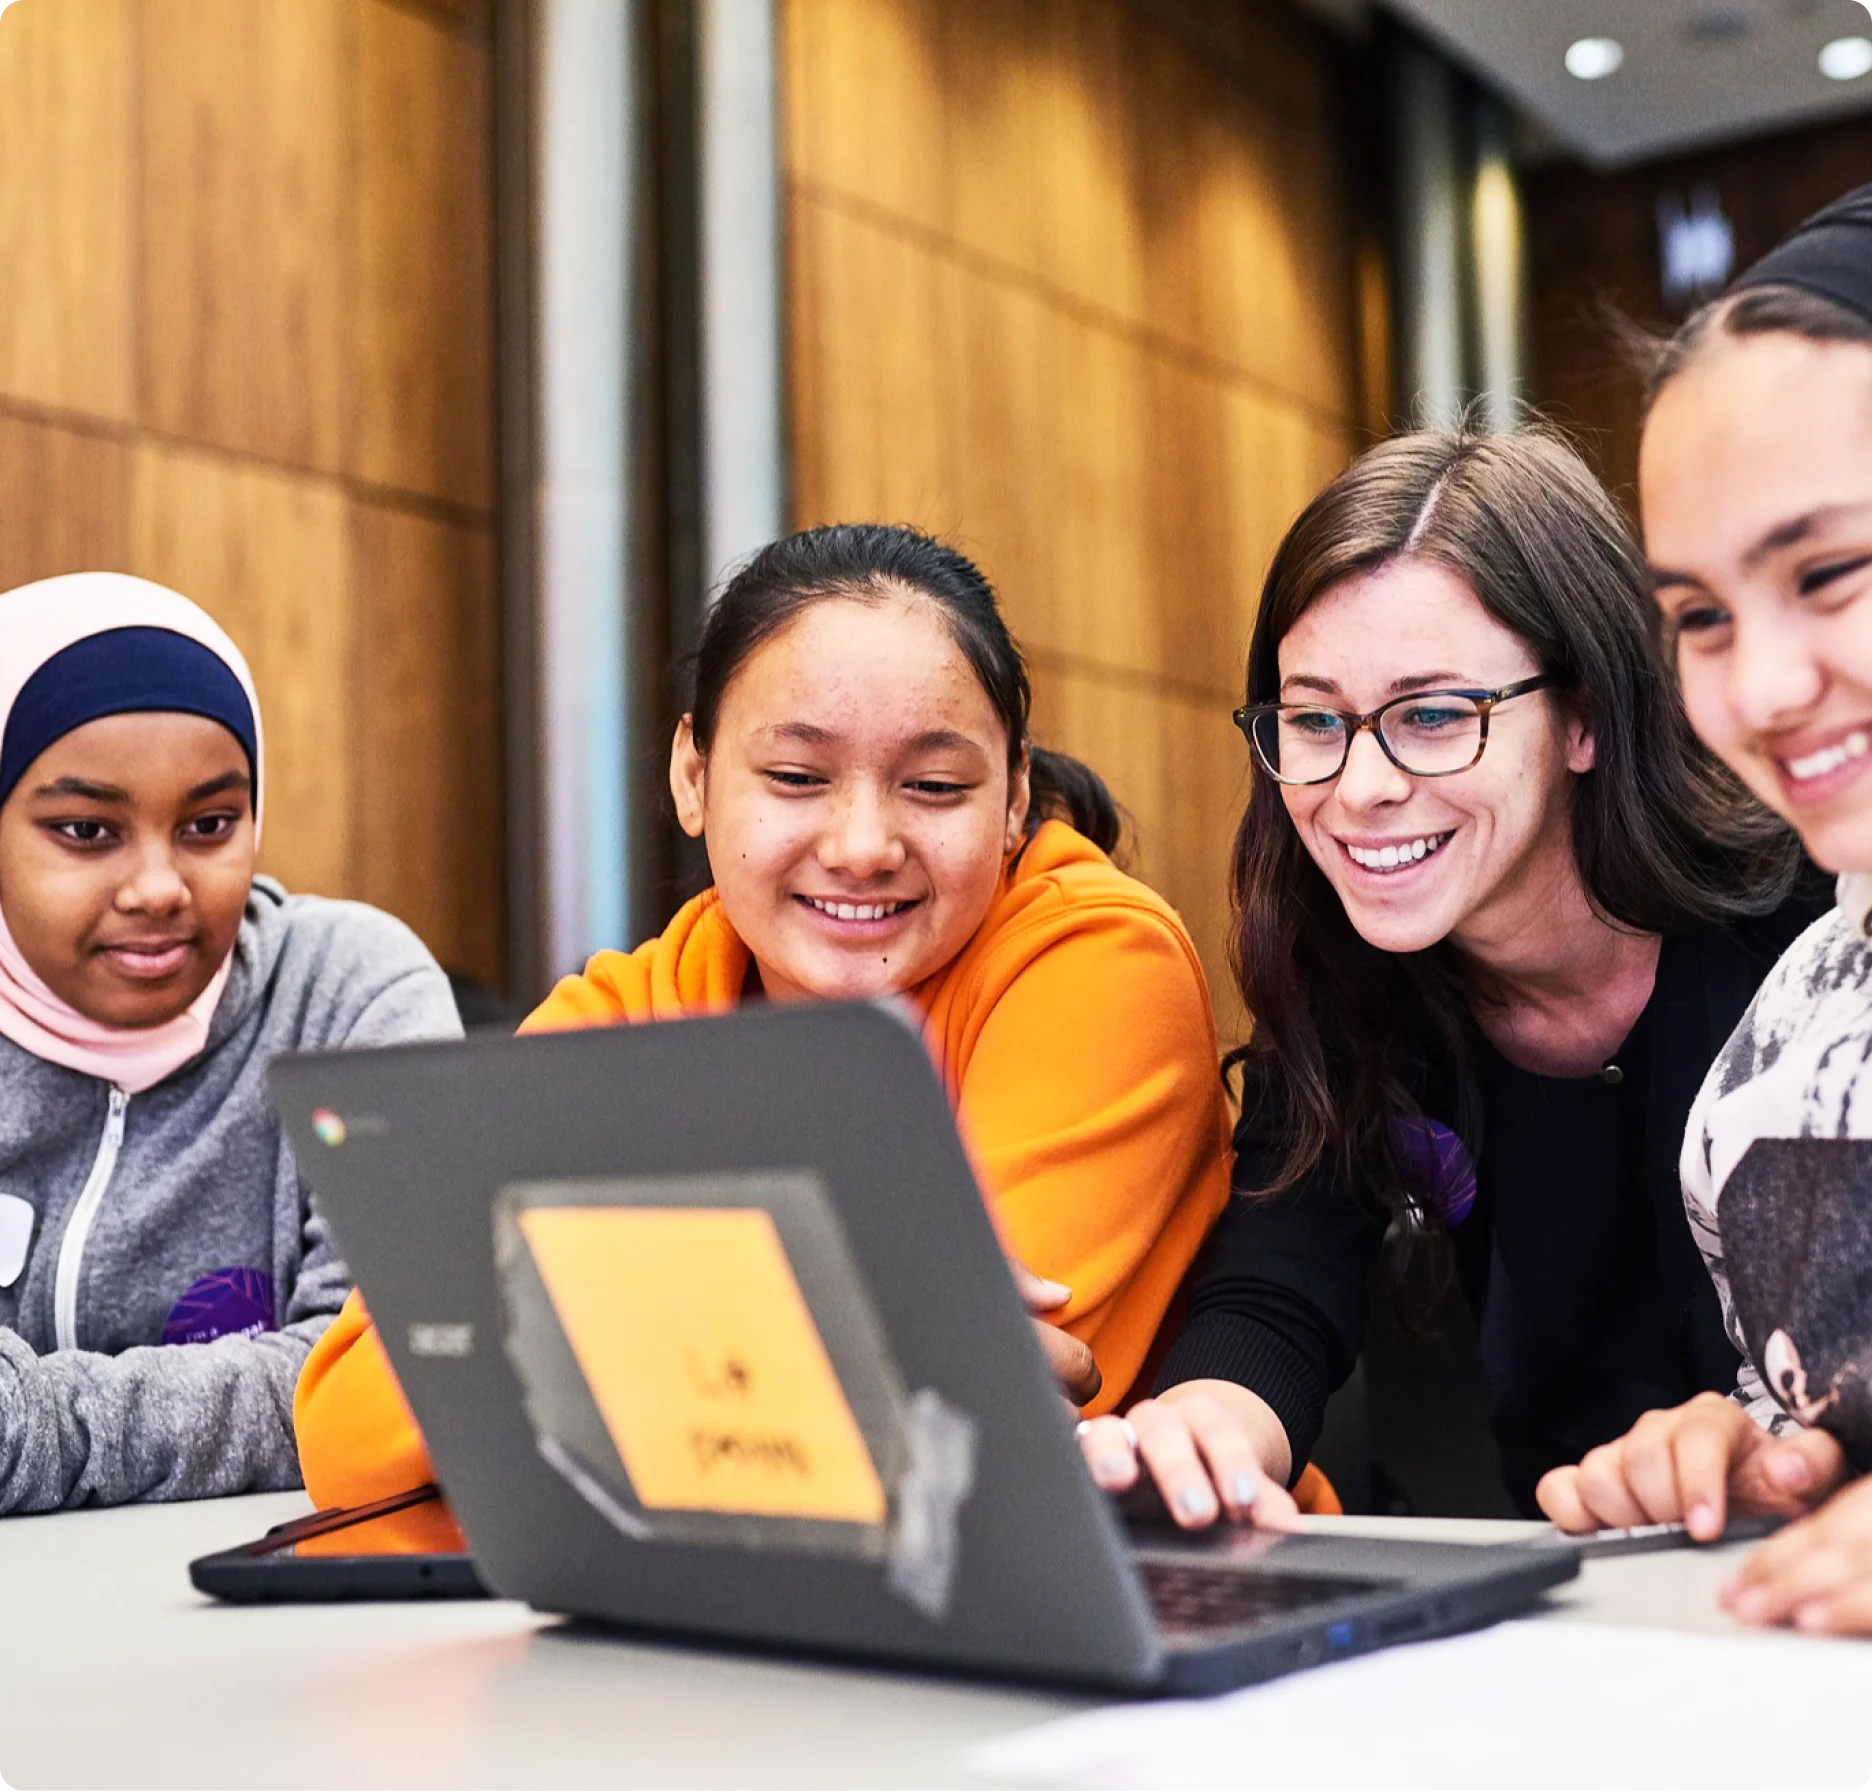 A diverse group of young women gathering around a laptop